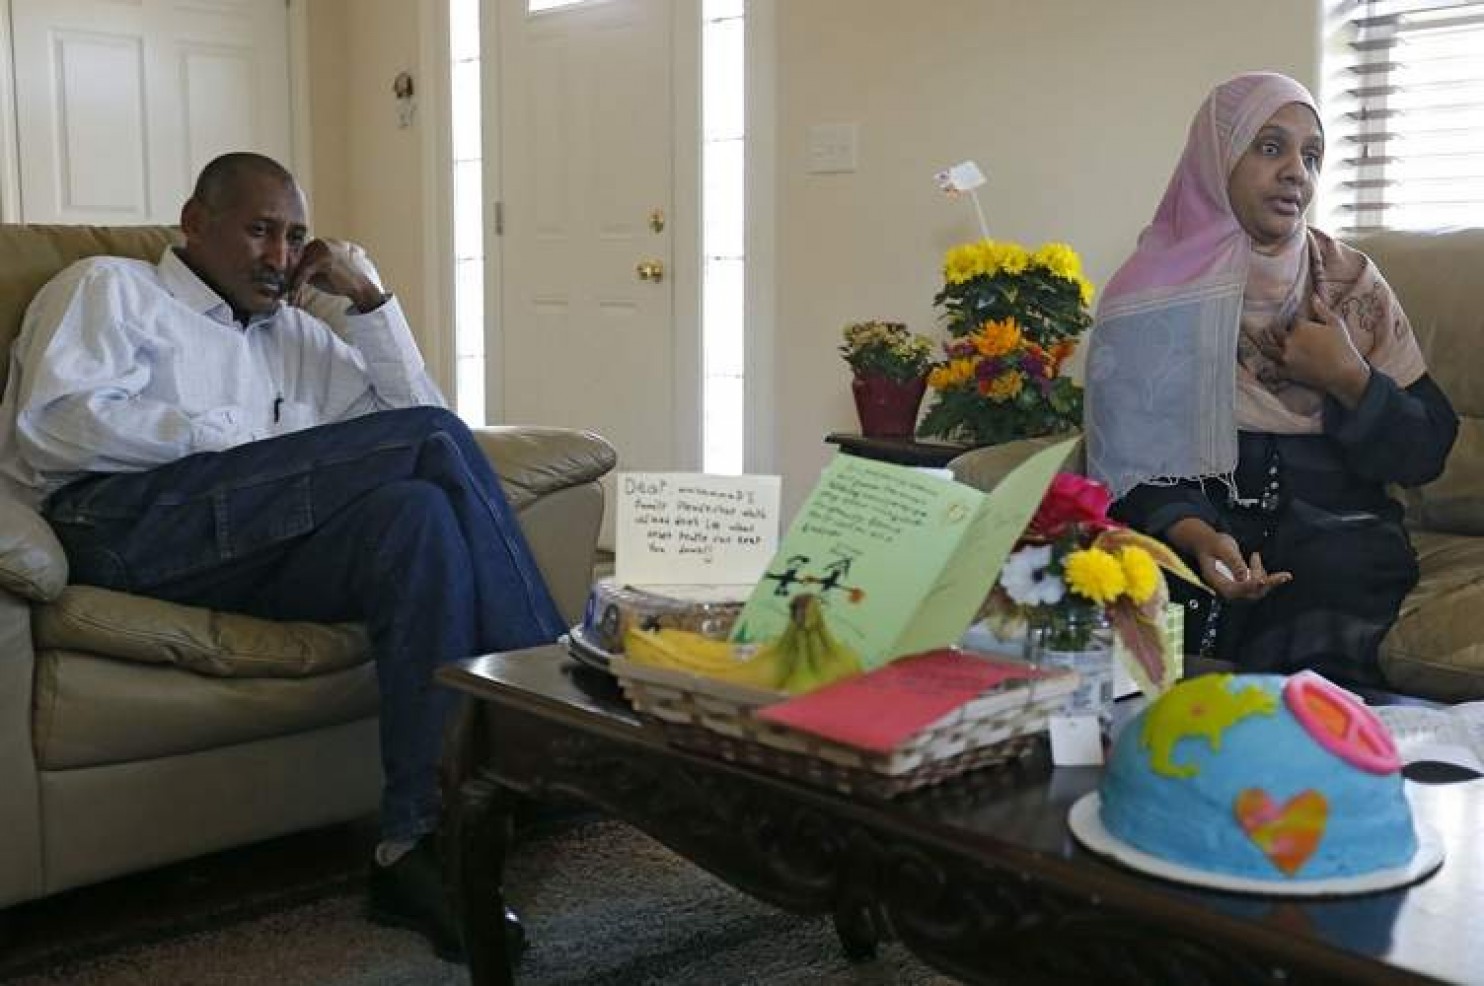 Amar Samel (left) and Muna Abdalla talk about a hate message taped to the door of their house in Iowa City 